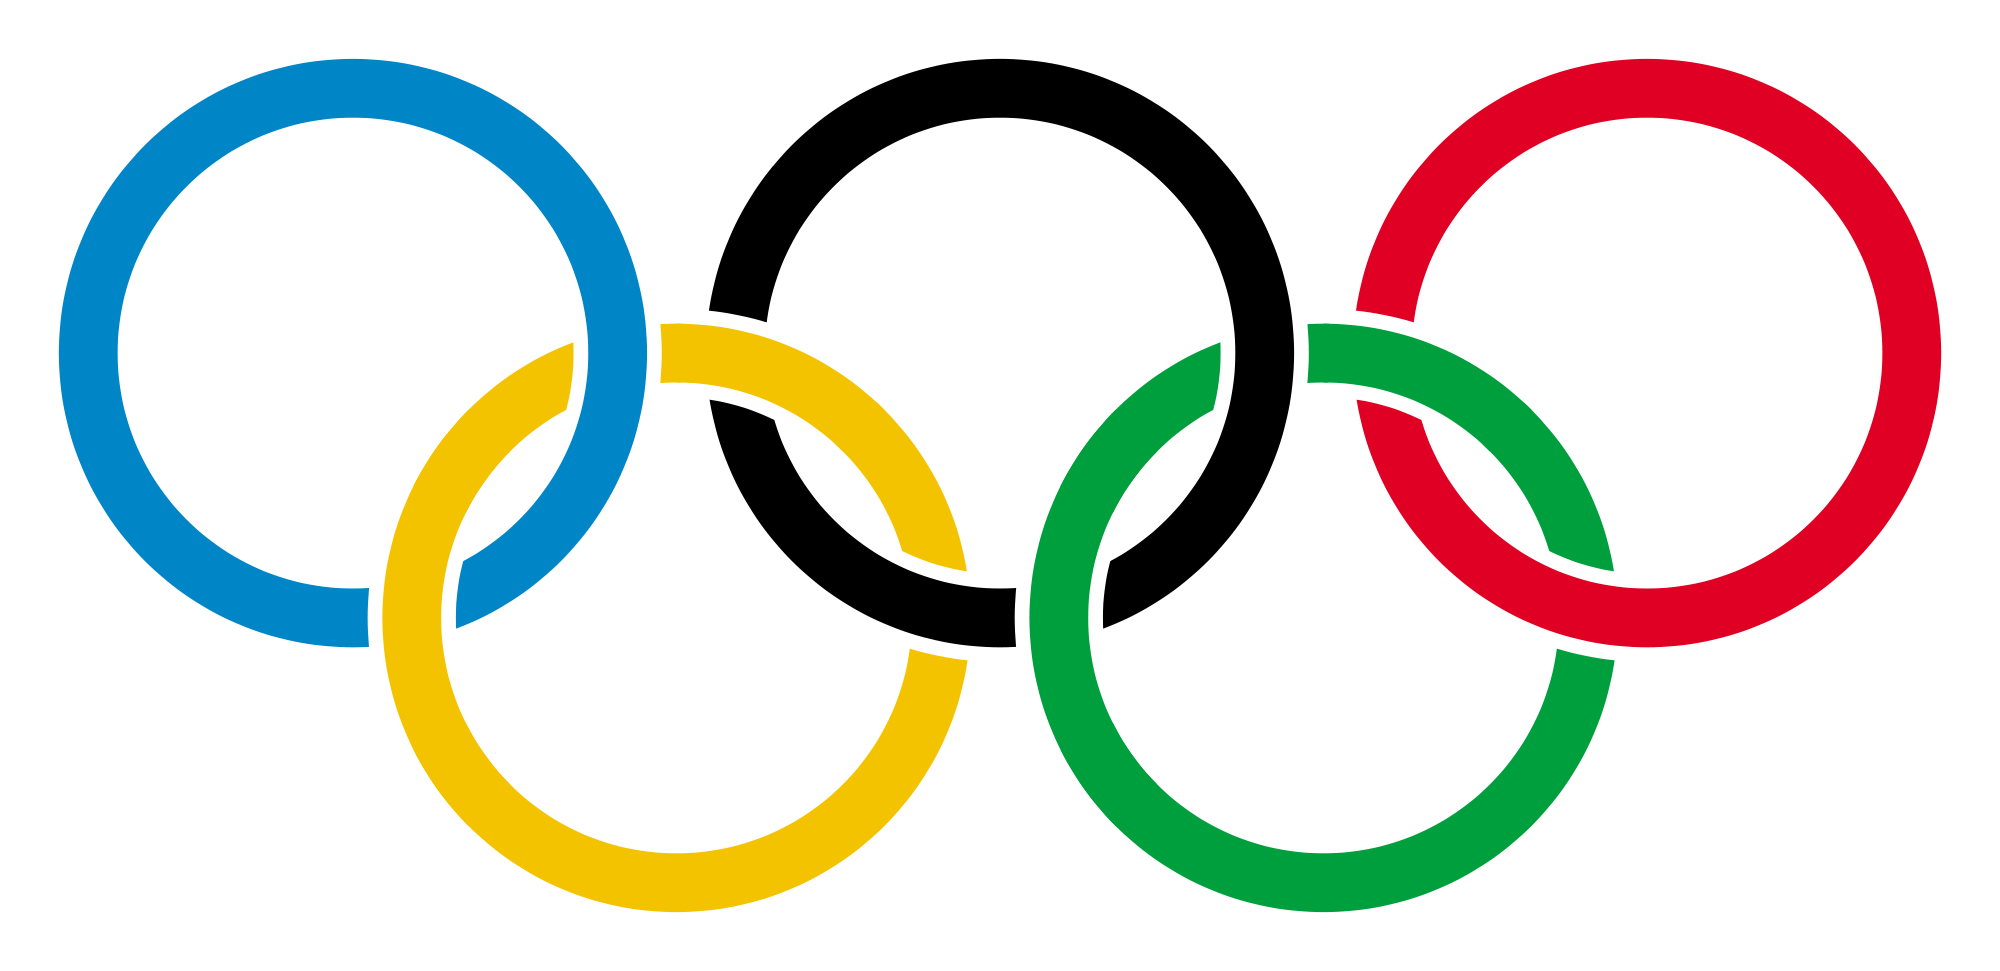 Olympic Rings Png Hd - Olympic Rings Png Picture, Transparent background PNG HD thumbnail